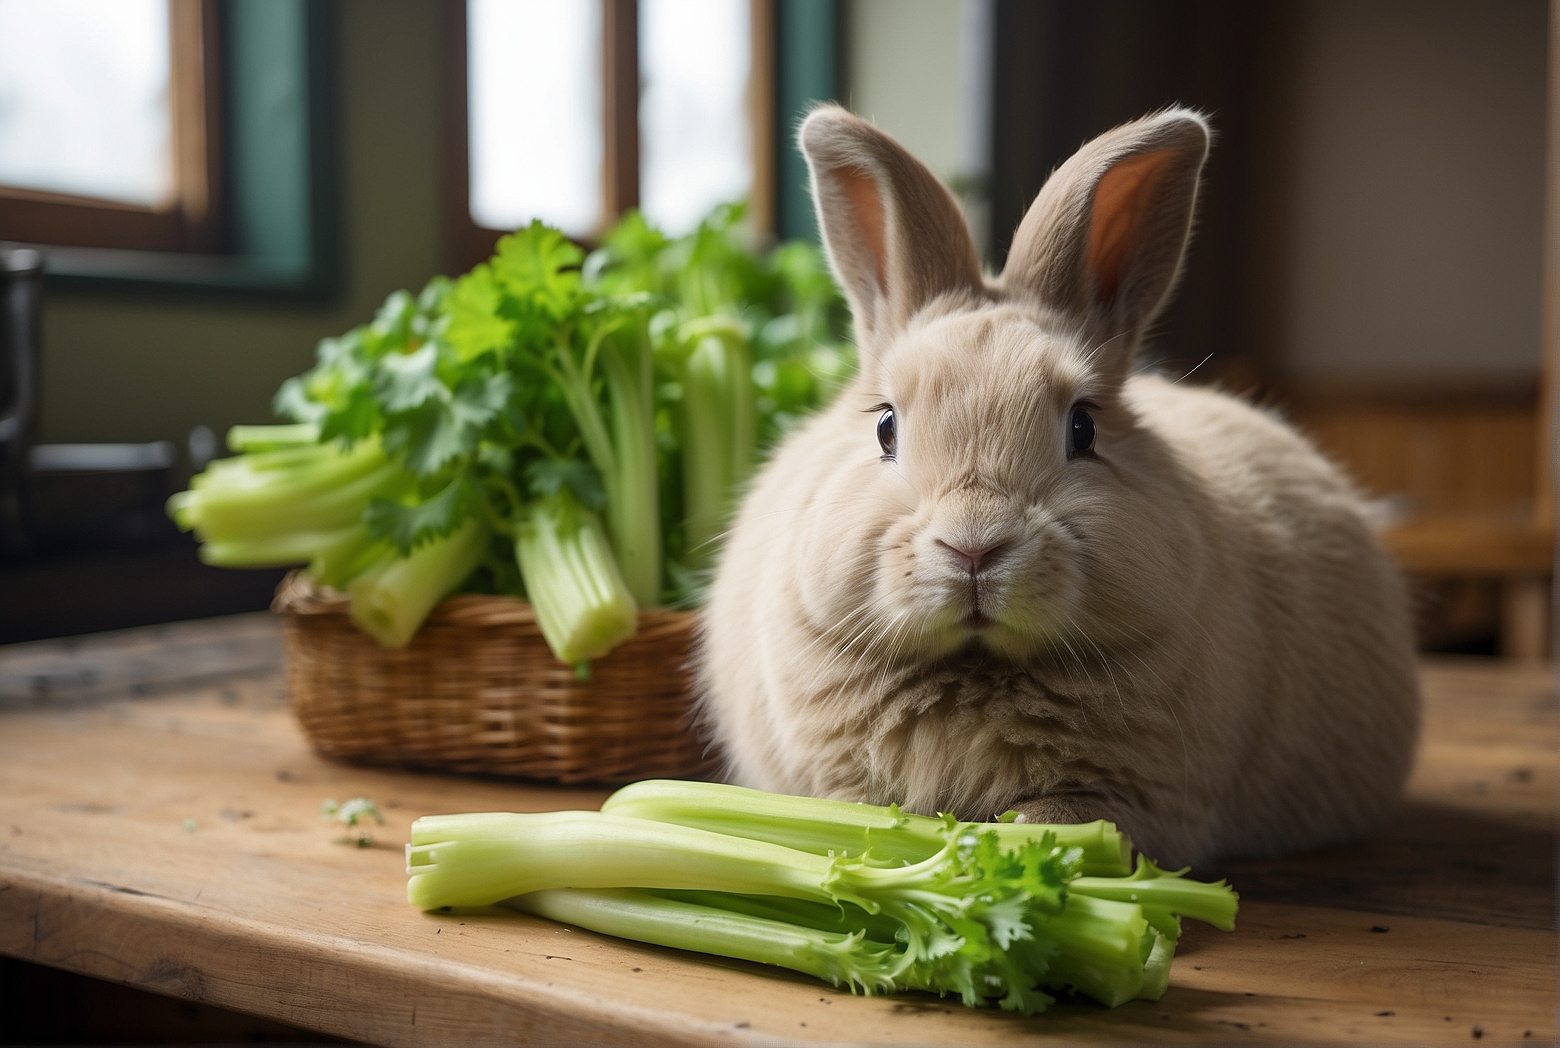 Can Holland Lops Eat Celery?